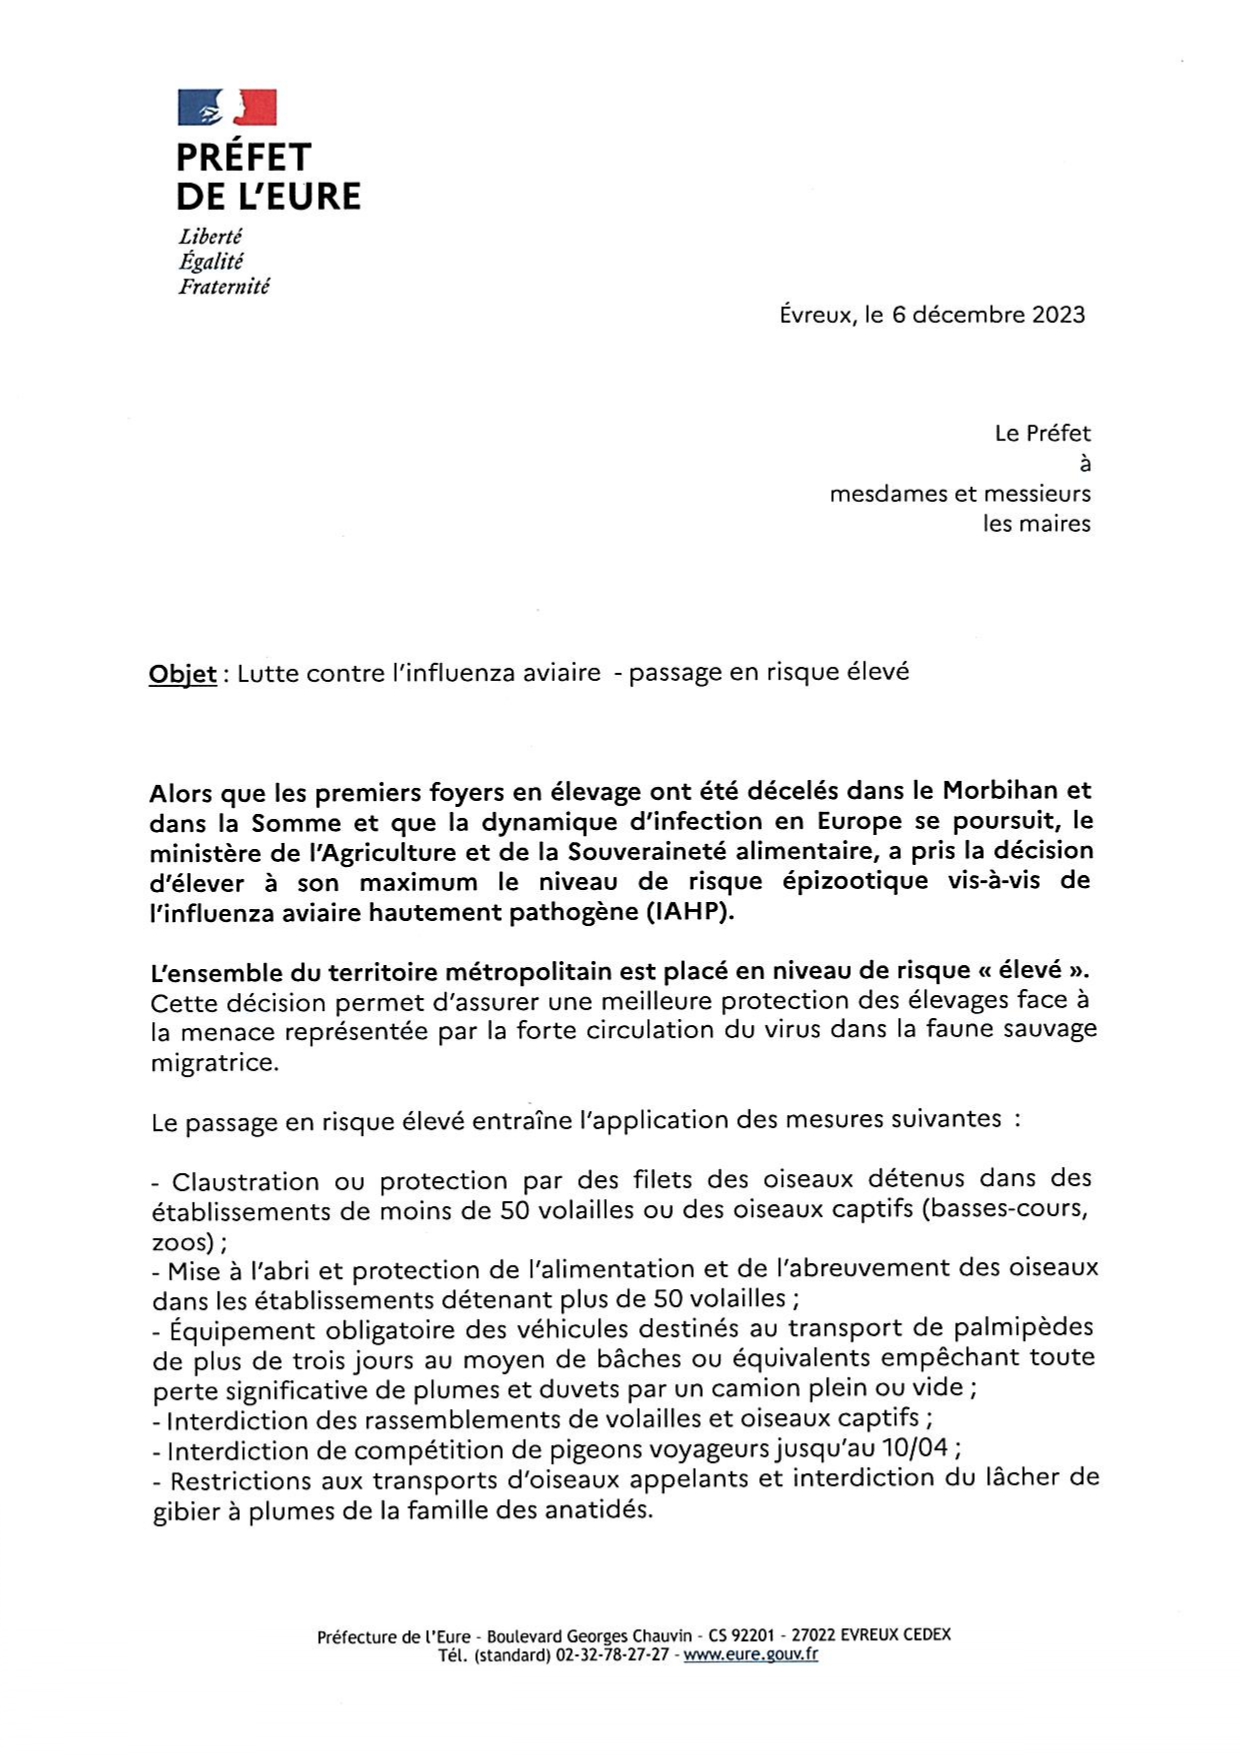 Courrier aux Maires IAHP page 0001